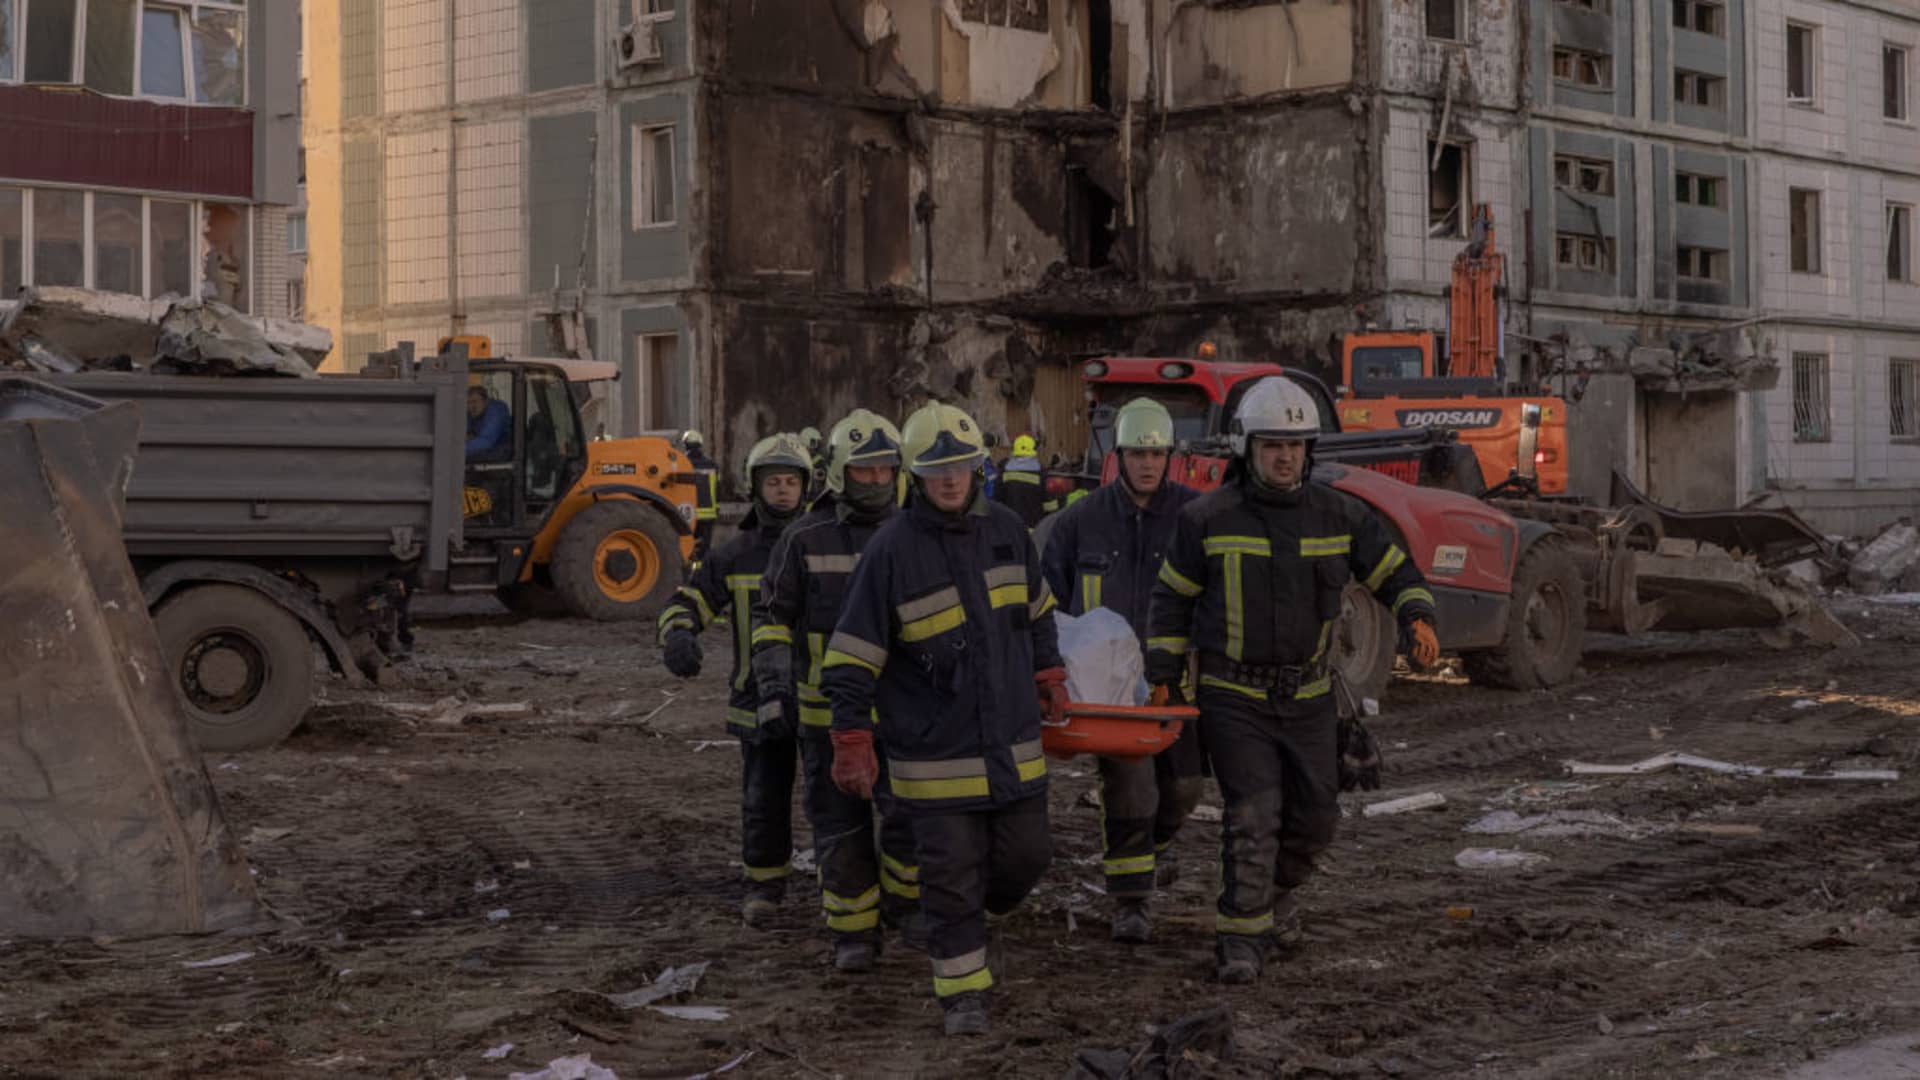 Emergency workers carry on a stretcher a body of a victim found under the rubble of the destroyed residential building following the Russian attack, on April 28, 2023 in Uman, Ukraine.